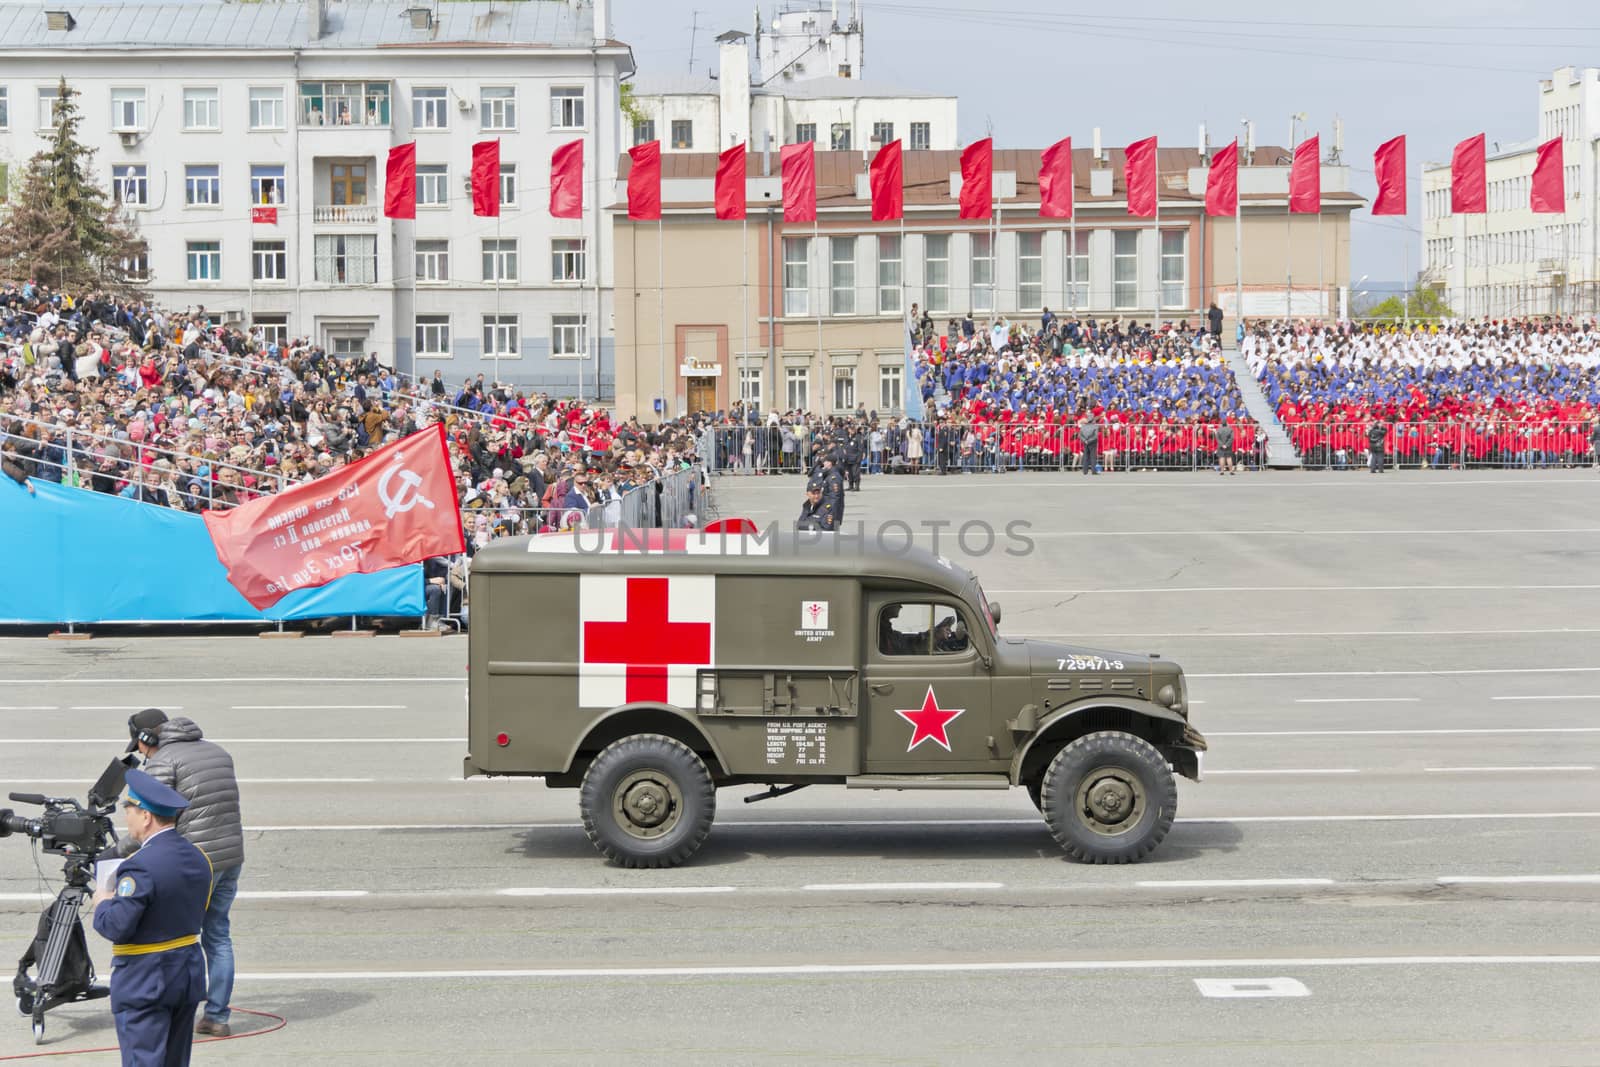 Russian military transport at the parade on annual Victory Day by Julialine